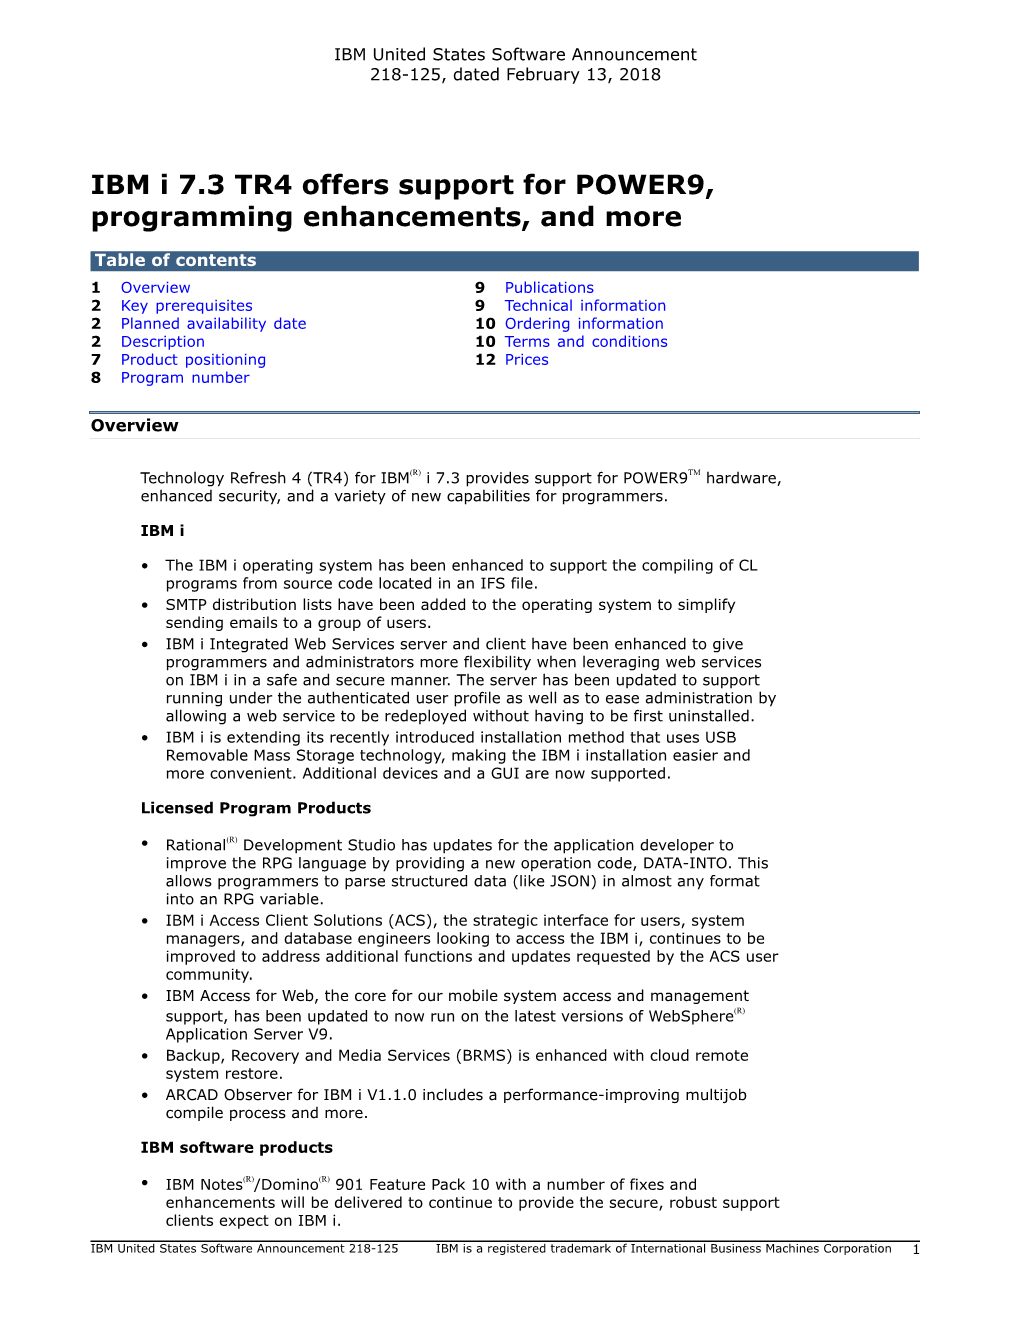 IBM I 7.3 TR4 Offers Support for POWER9, Programming Enhancements, and More